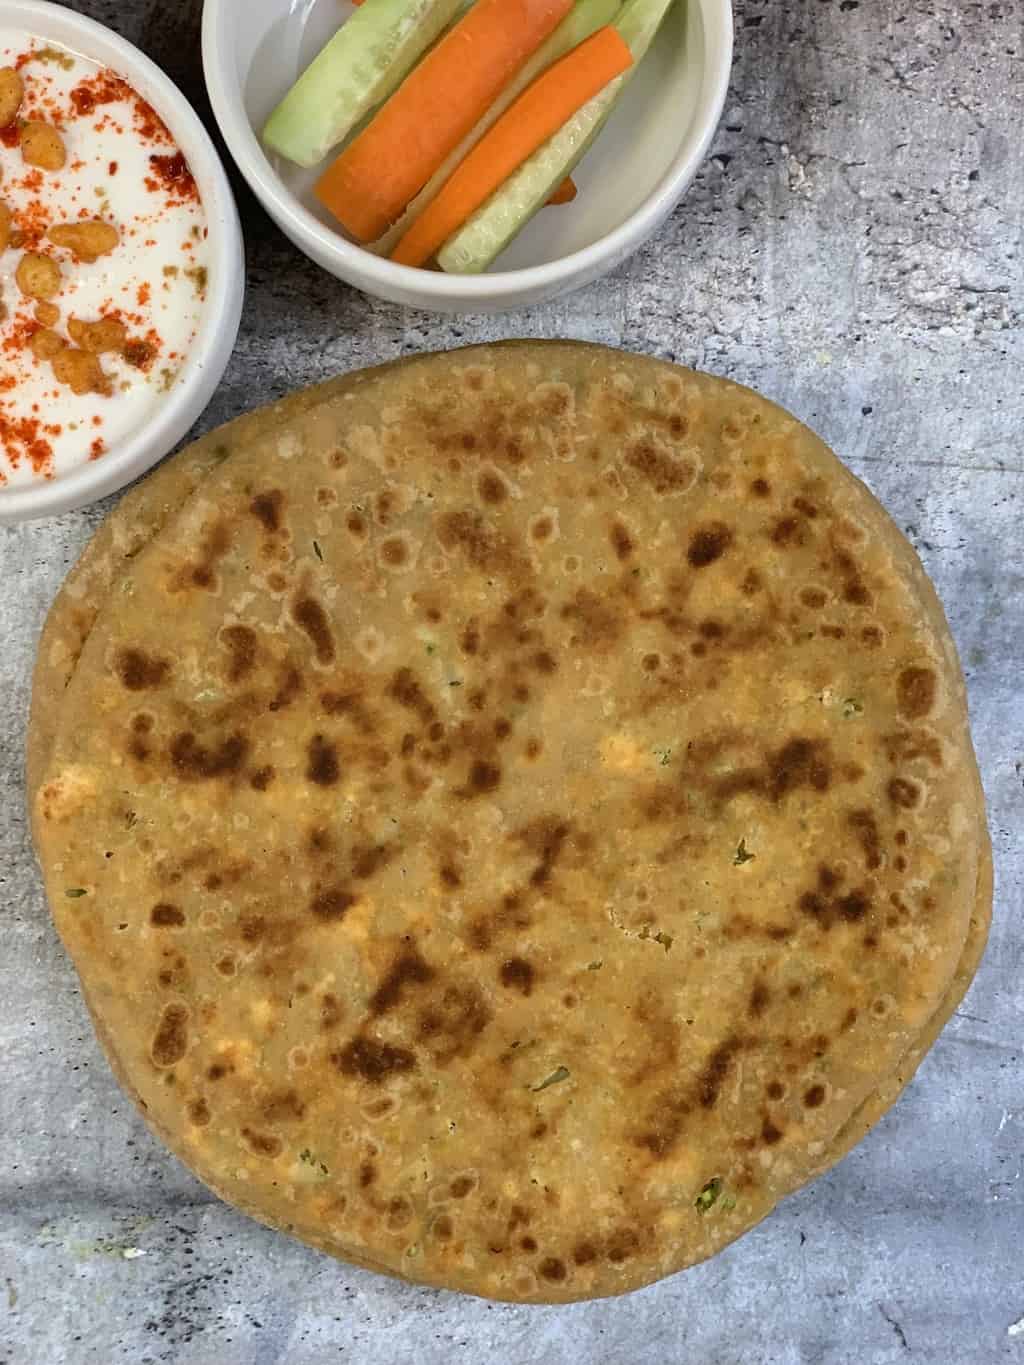 stuffed broccoli paneer paratha on a plate with cucumbers and raita on the side